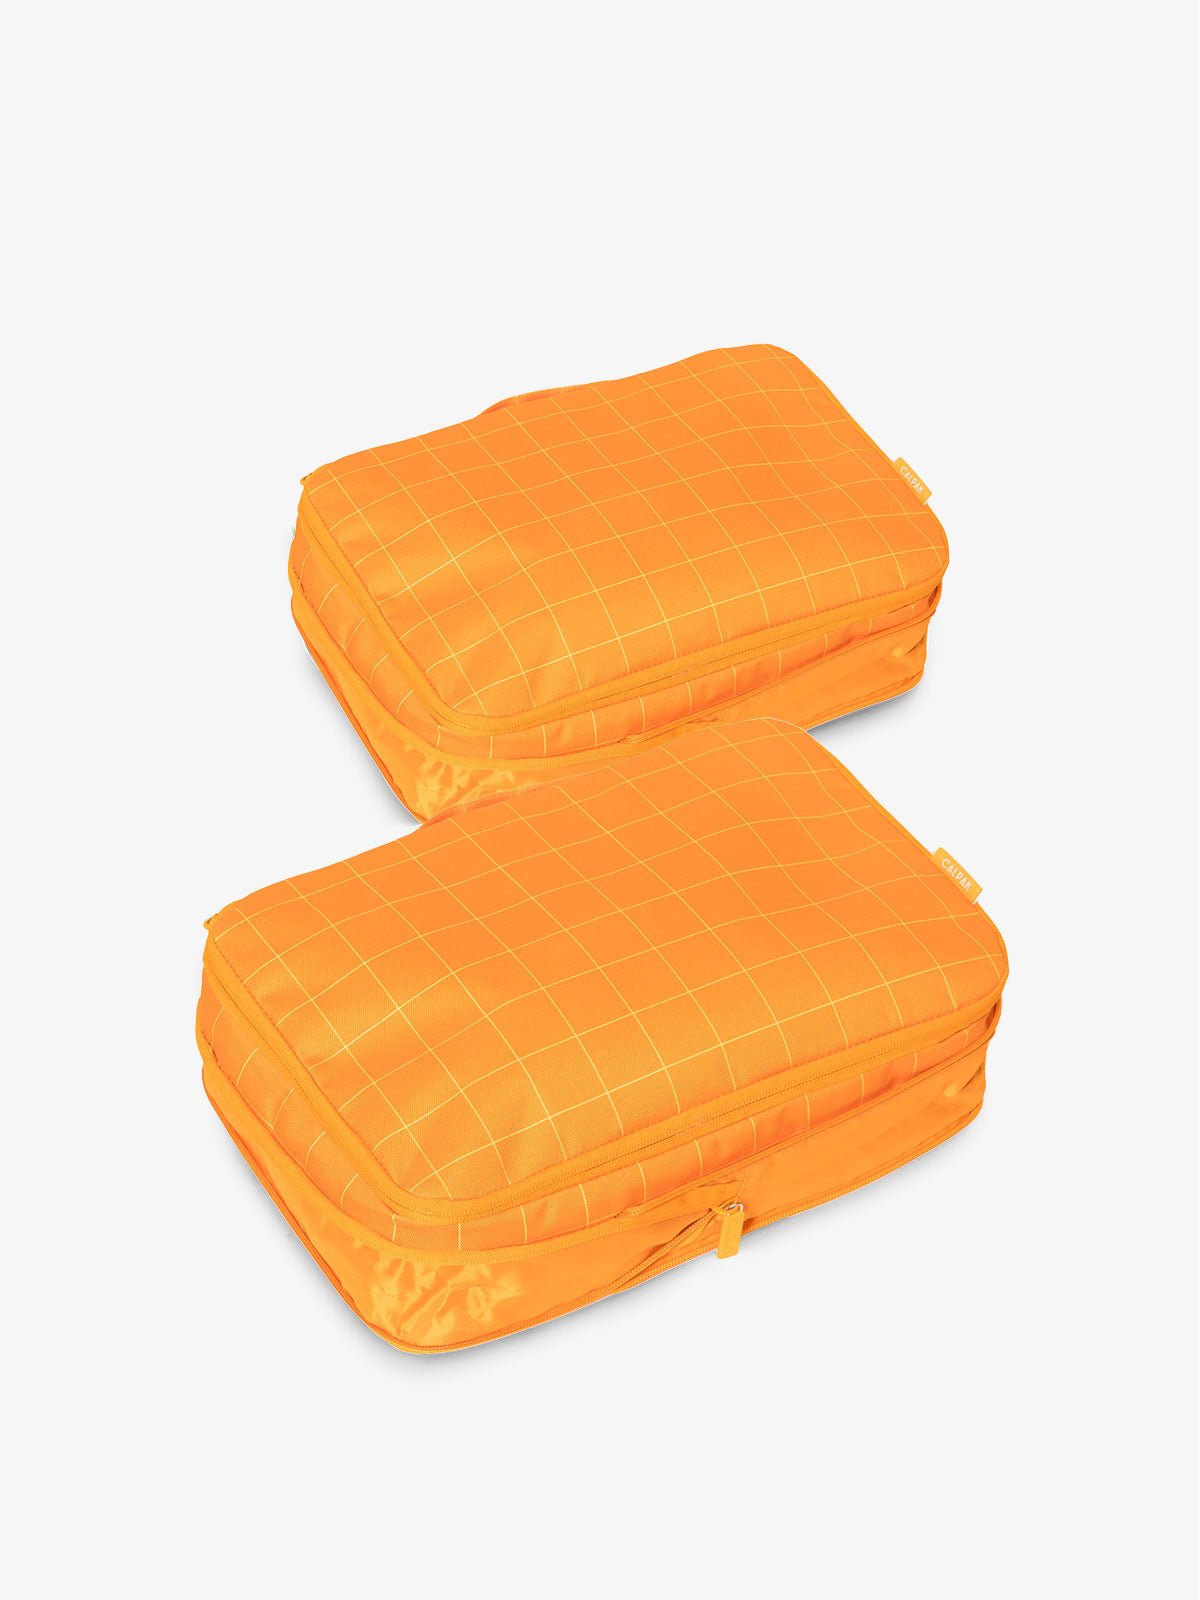 CALPAK compression packing cubes with handles in orange grid print